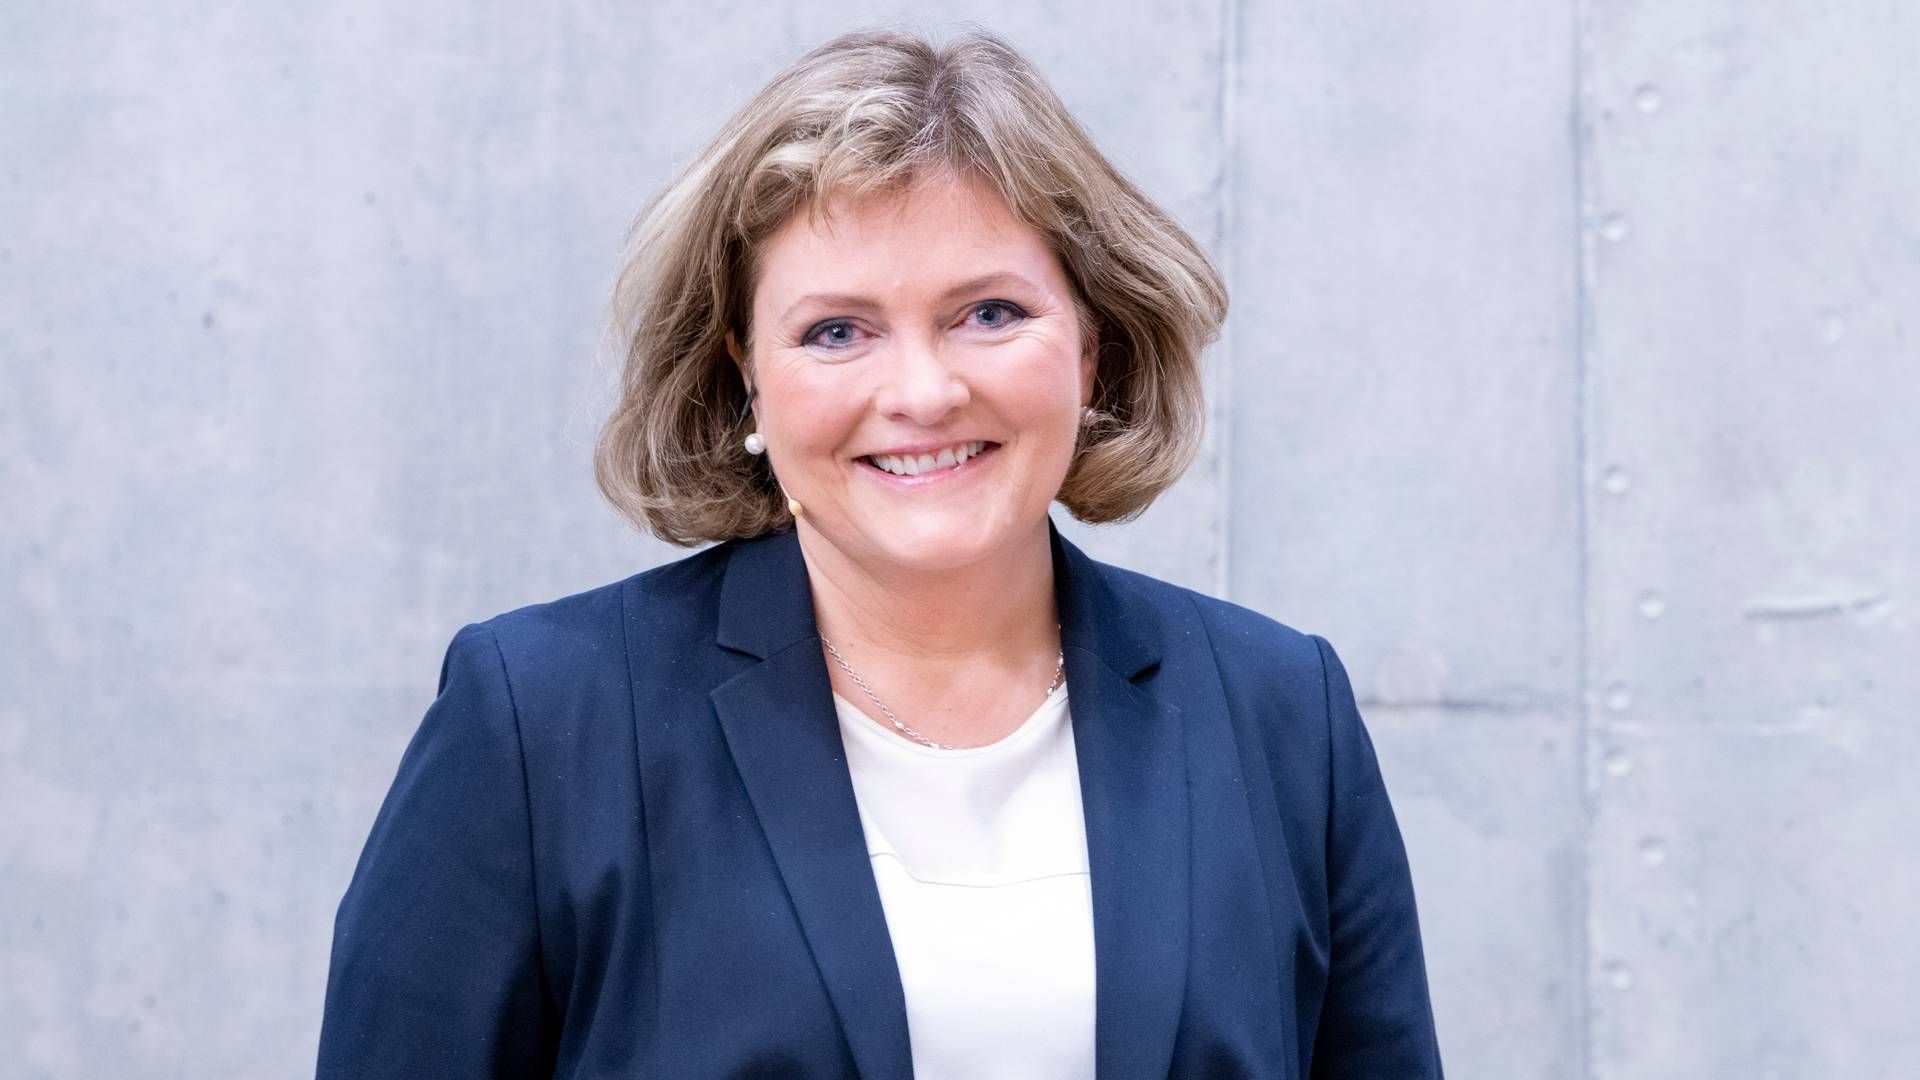 Cathrine Hellandsvik, executive vice presdent for life and pensions at KLP, is asking Ulstein municipality to provide "reasoned answers" to the objections KLP has raised after the company lost the tender round.